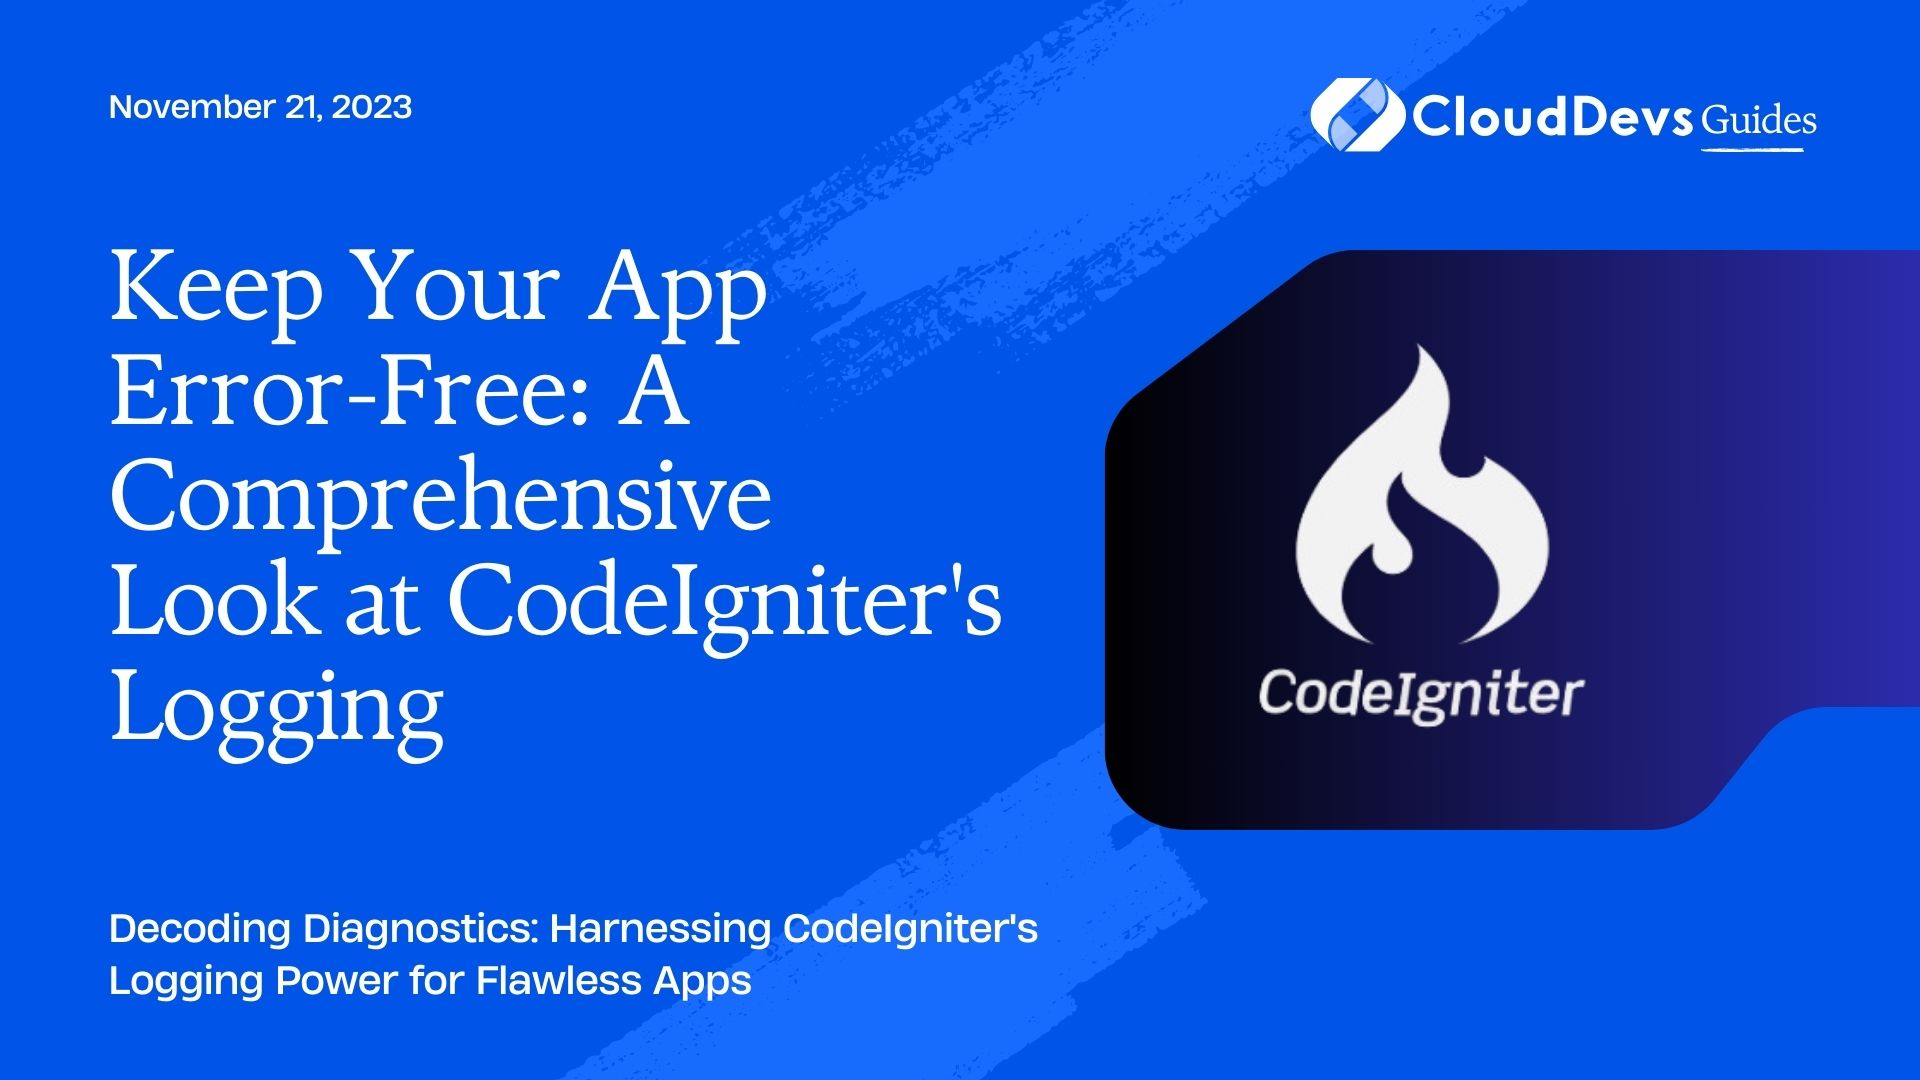 Keep Your App Error-Free: A Comprehensive Look at CodeIgniter's Logging